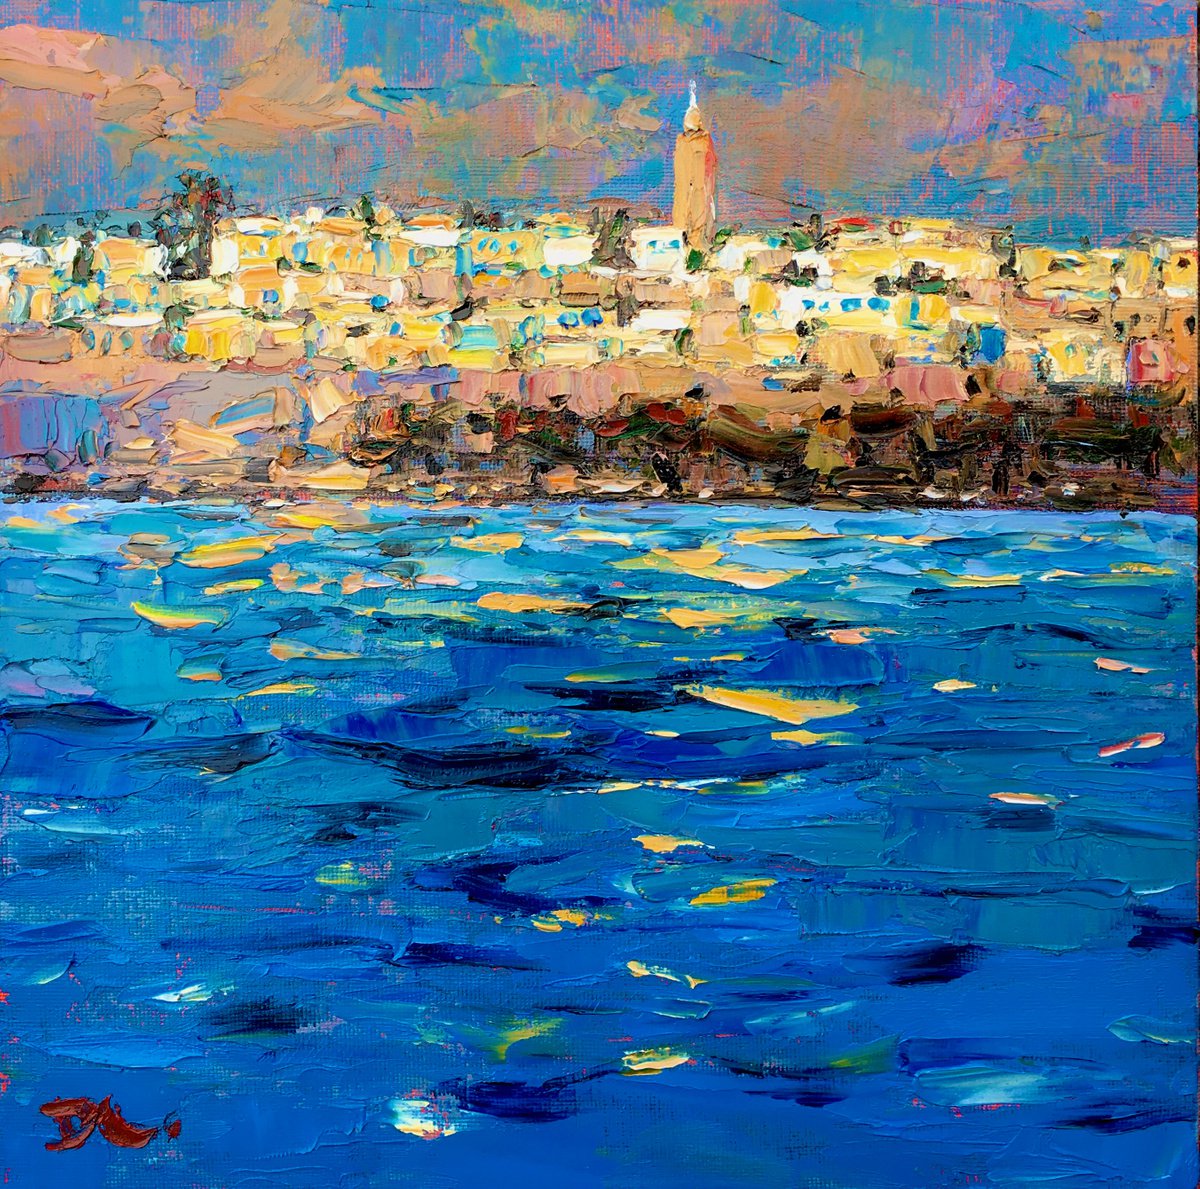 Morocco Series - Sunset in Rabat by Dong Lin Zhang